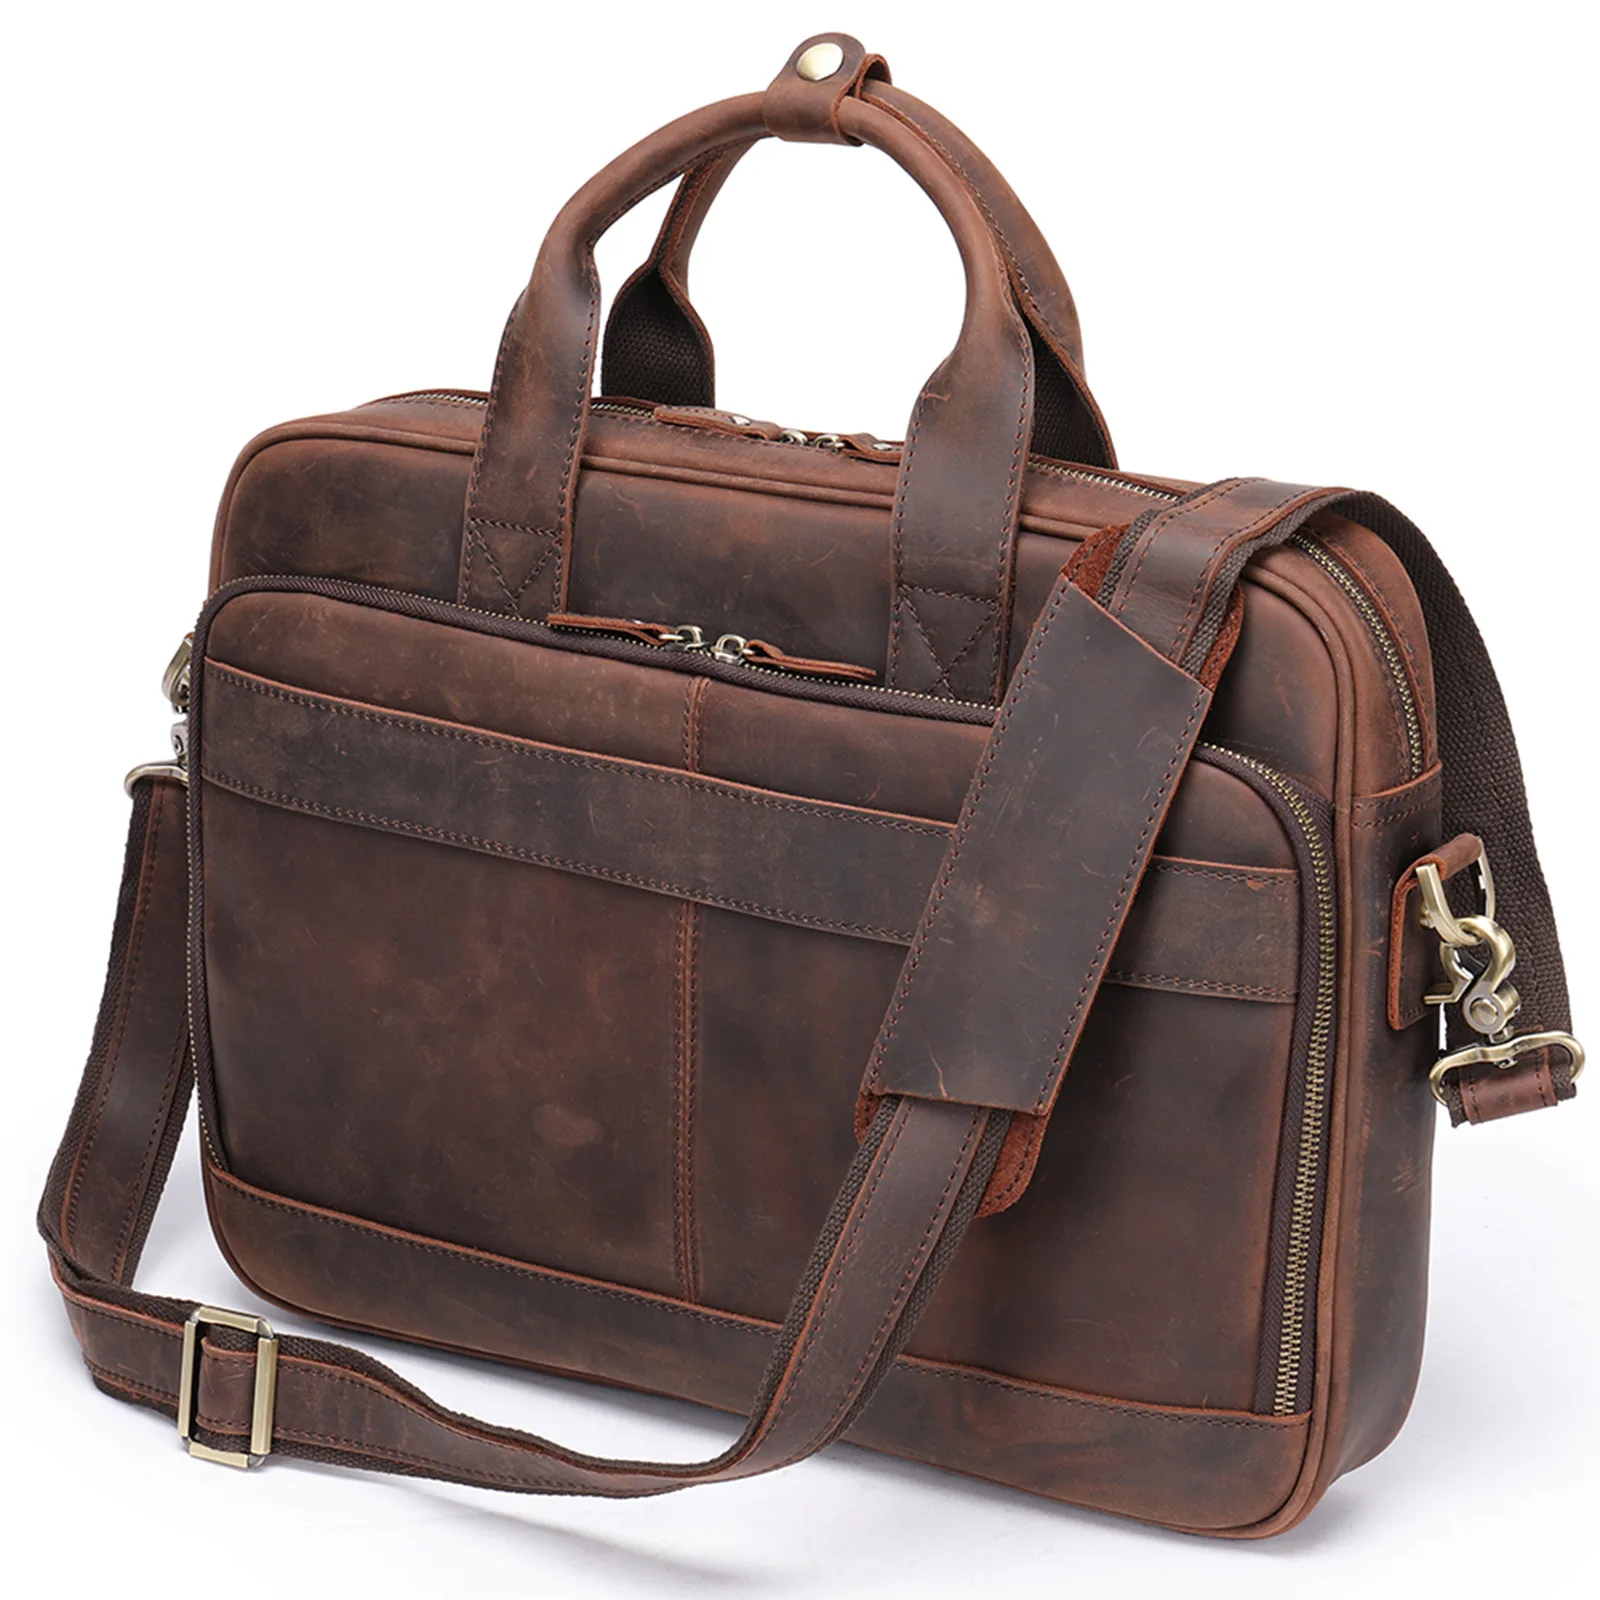 

Bags Briefcase Daily Bag Working Bag Bag Documents Laptop Men Retro Genuine Male Pad Casual For 15.6 Leather Handbags Tote